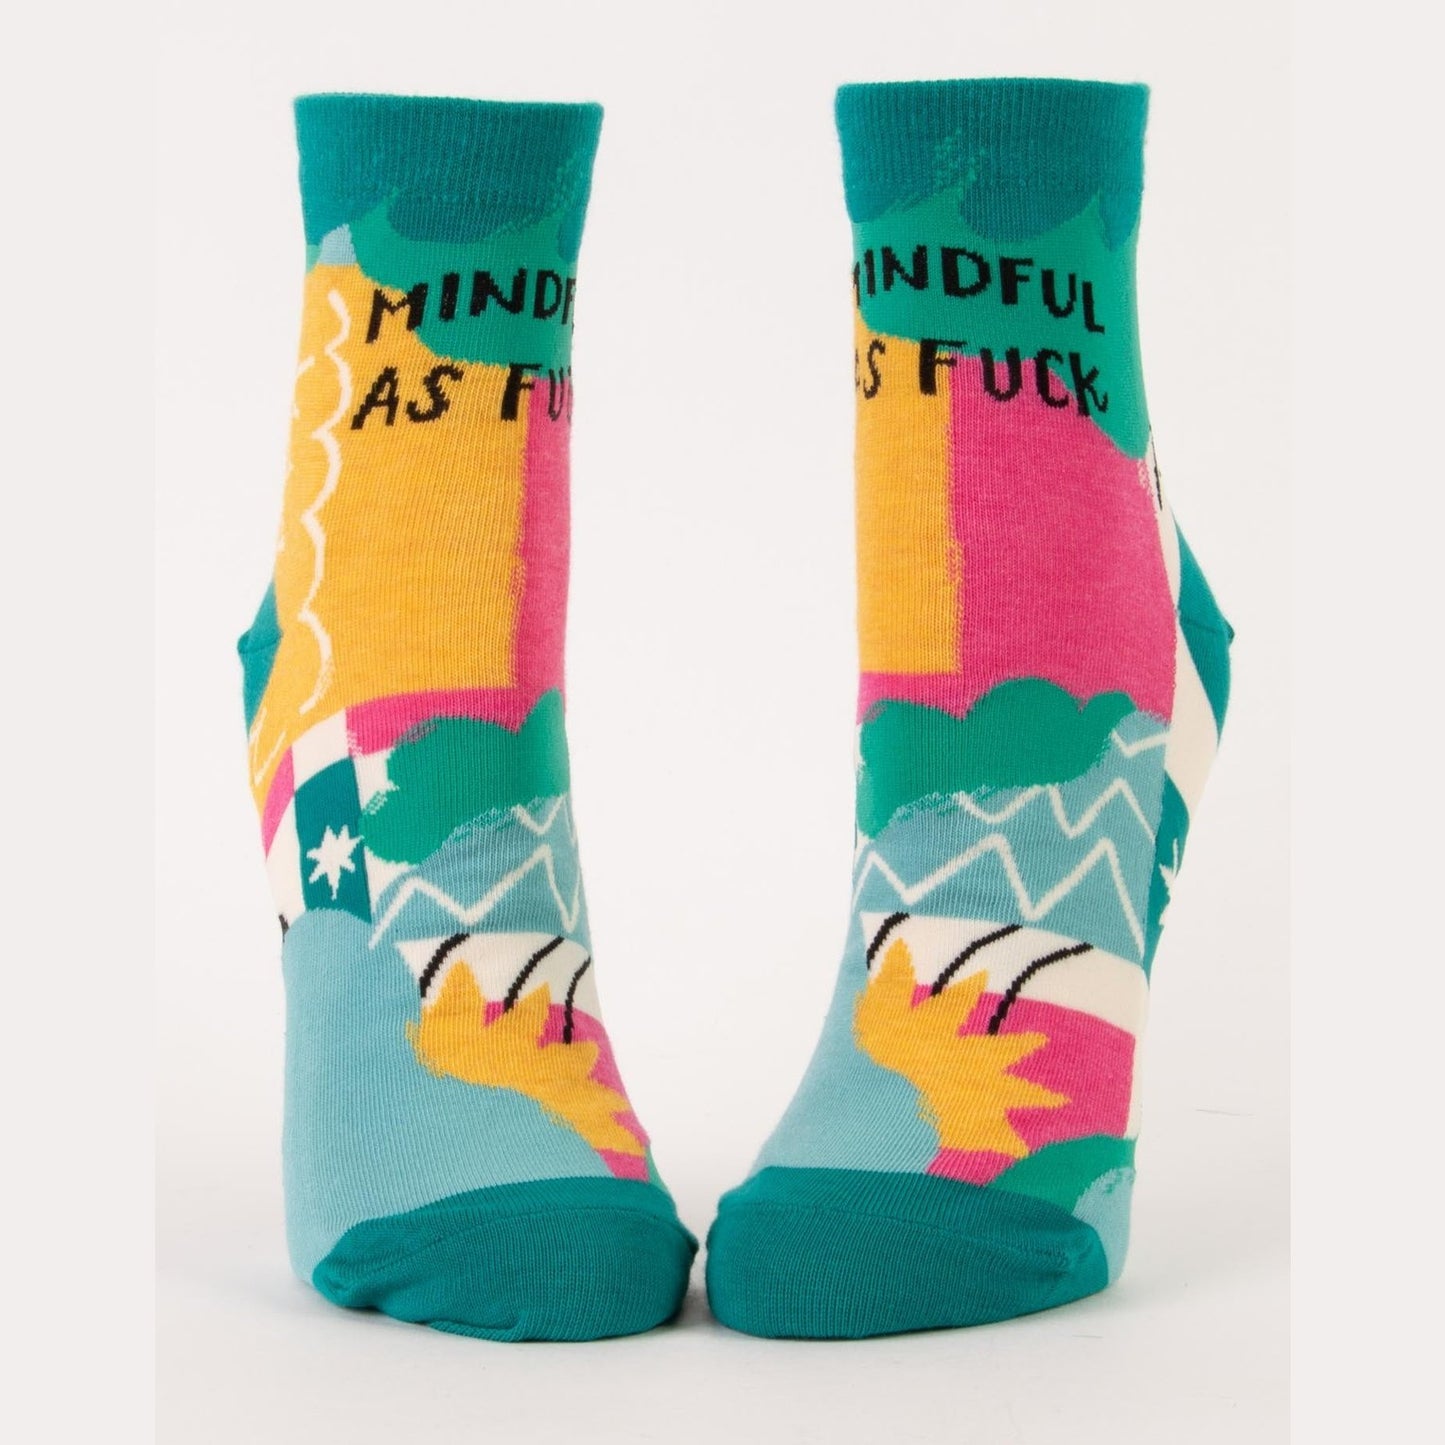 Minful As Fuck Ankle Crew Socks